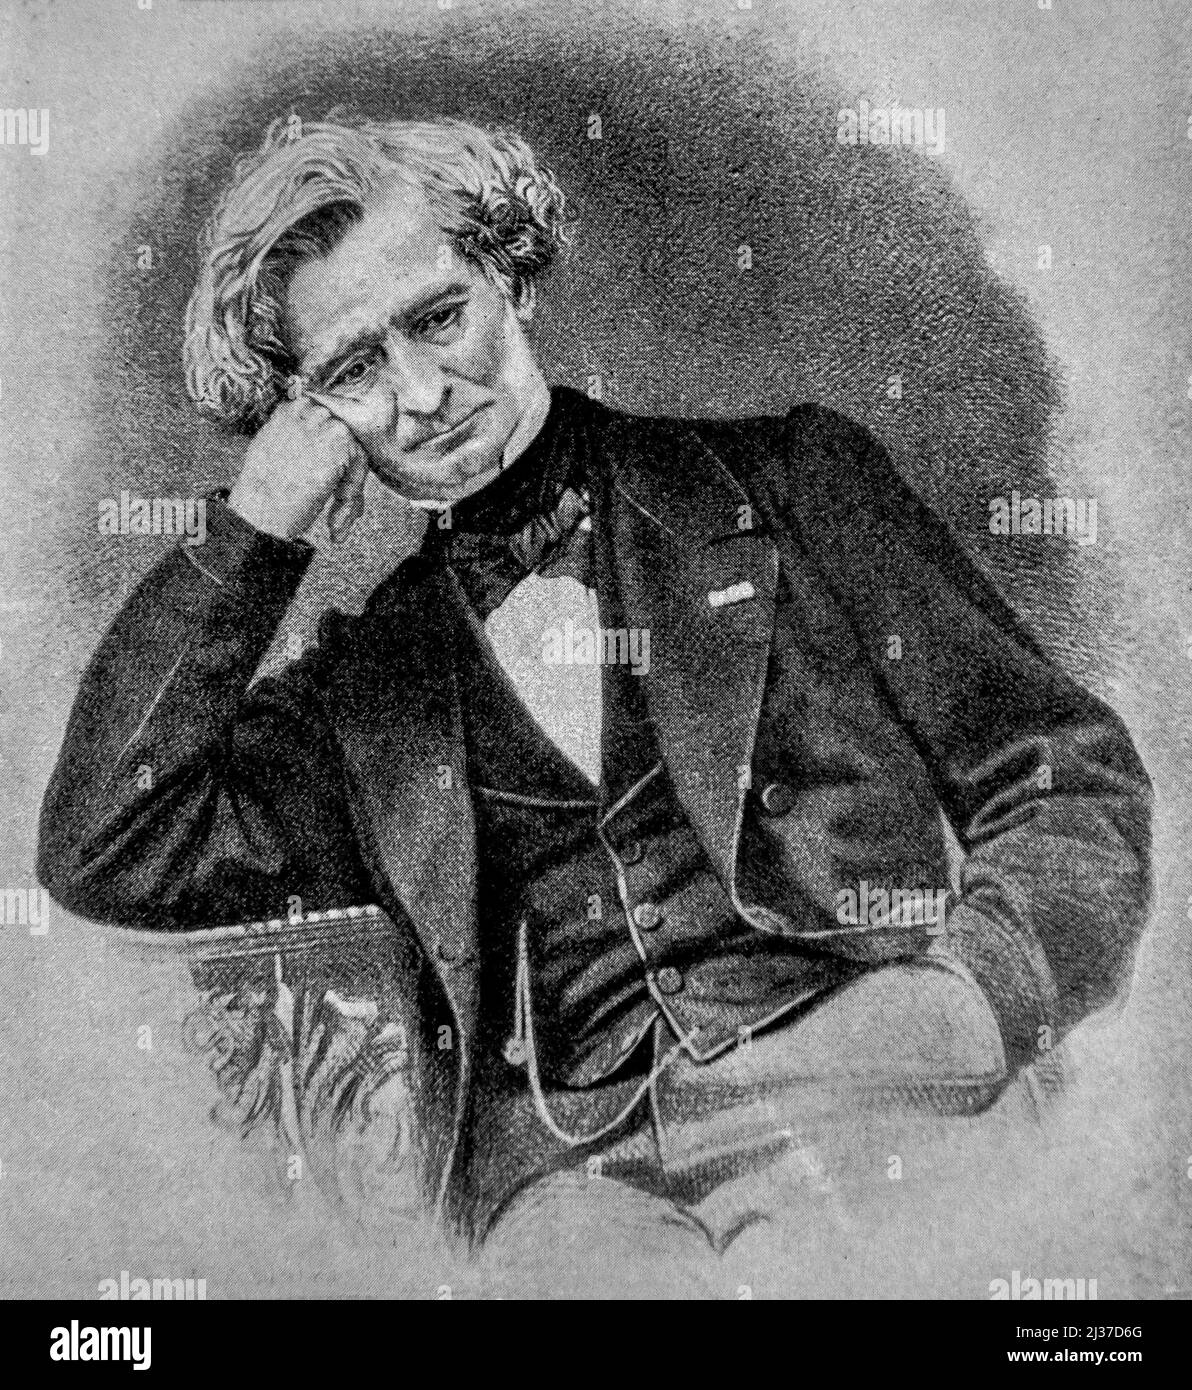 Hector Berlioz-.Louis-Hector Berlioz (11 December 1803 â€“ 8 March 1869) was a French Romantic composer and conductor. His output includes orchestral Stock Photo